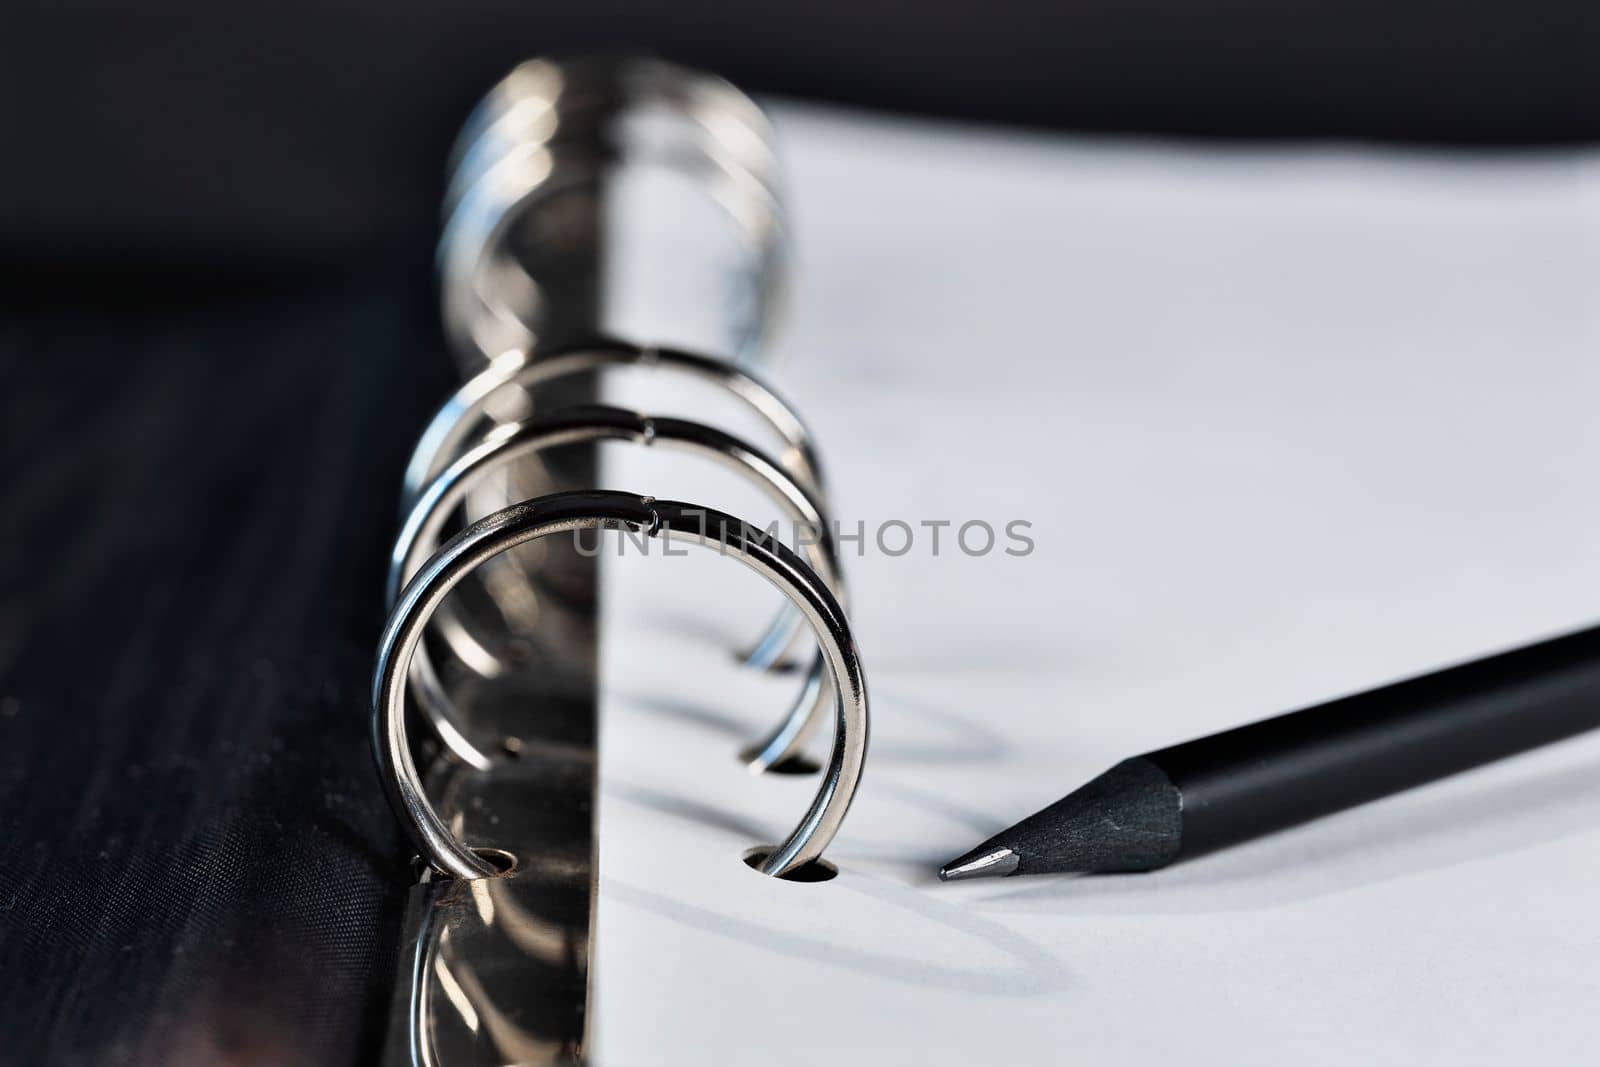 Ring binder and pencil by victimewalker